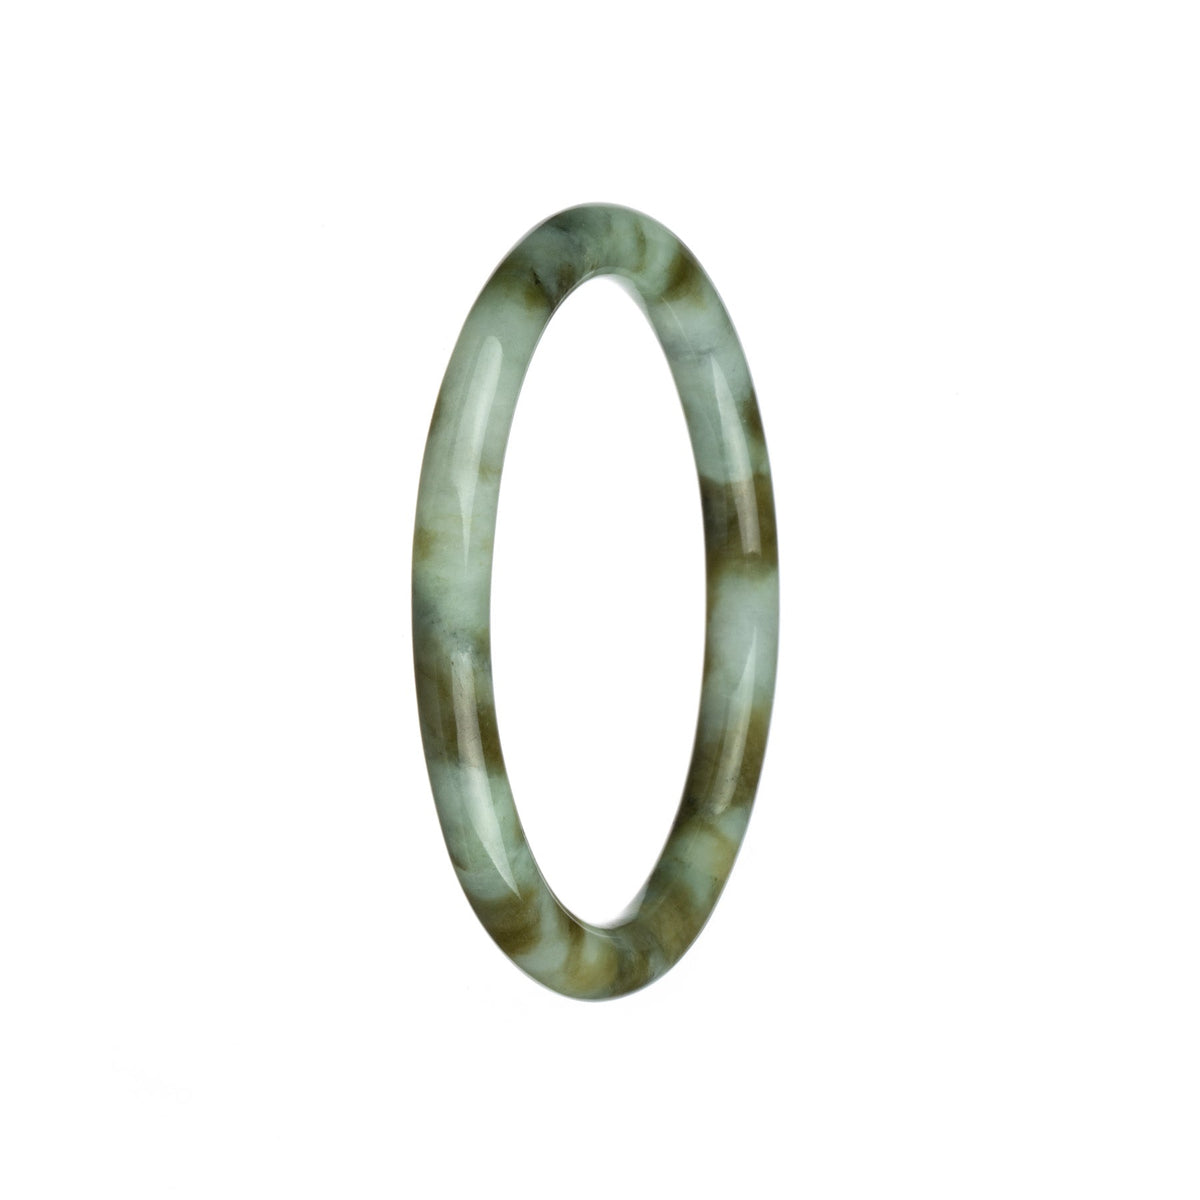 Alt text: A close-up photo of an authentic untreated white and brown pattern jade bangle, with a petite round shape and a diameter of 60mm. The brand name "MAYS" is also visible.